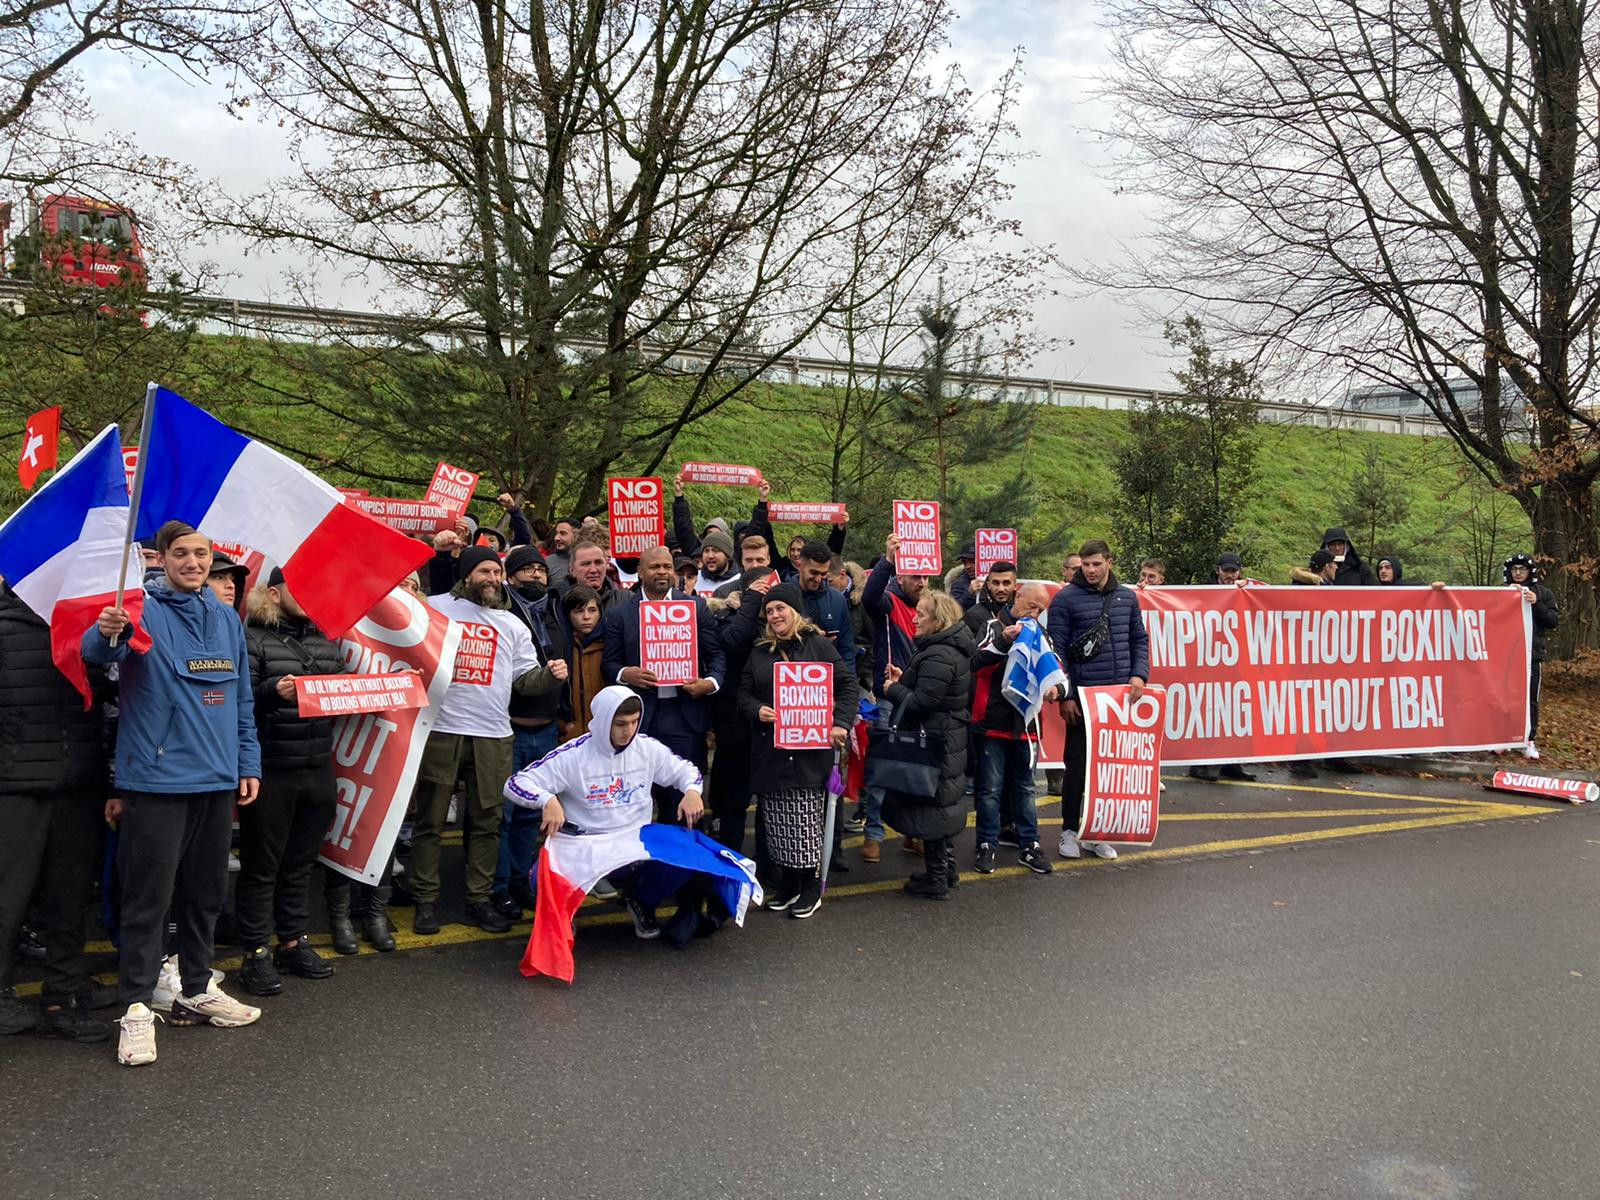 A group protesting about the decision to exclude boxing from the Olympic programme at Los Angeles 2028 gathered outside Olympic House in Lausanne ©ITG